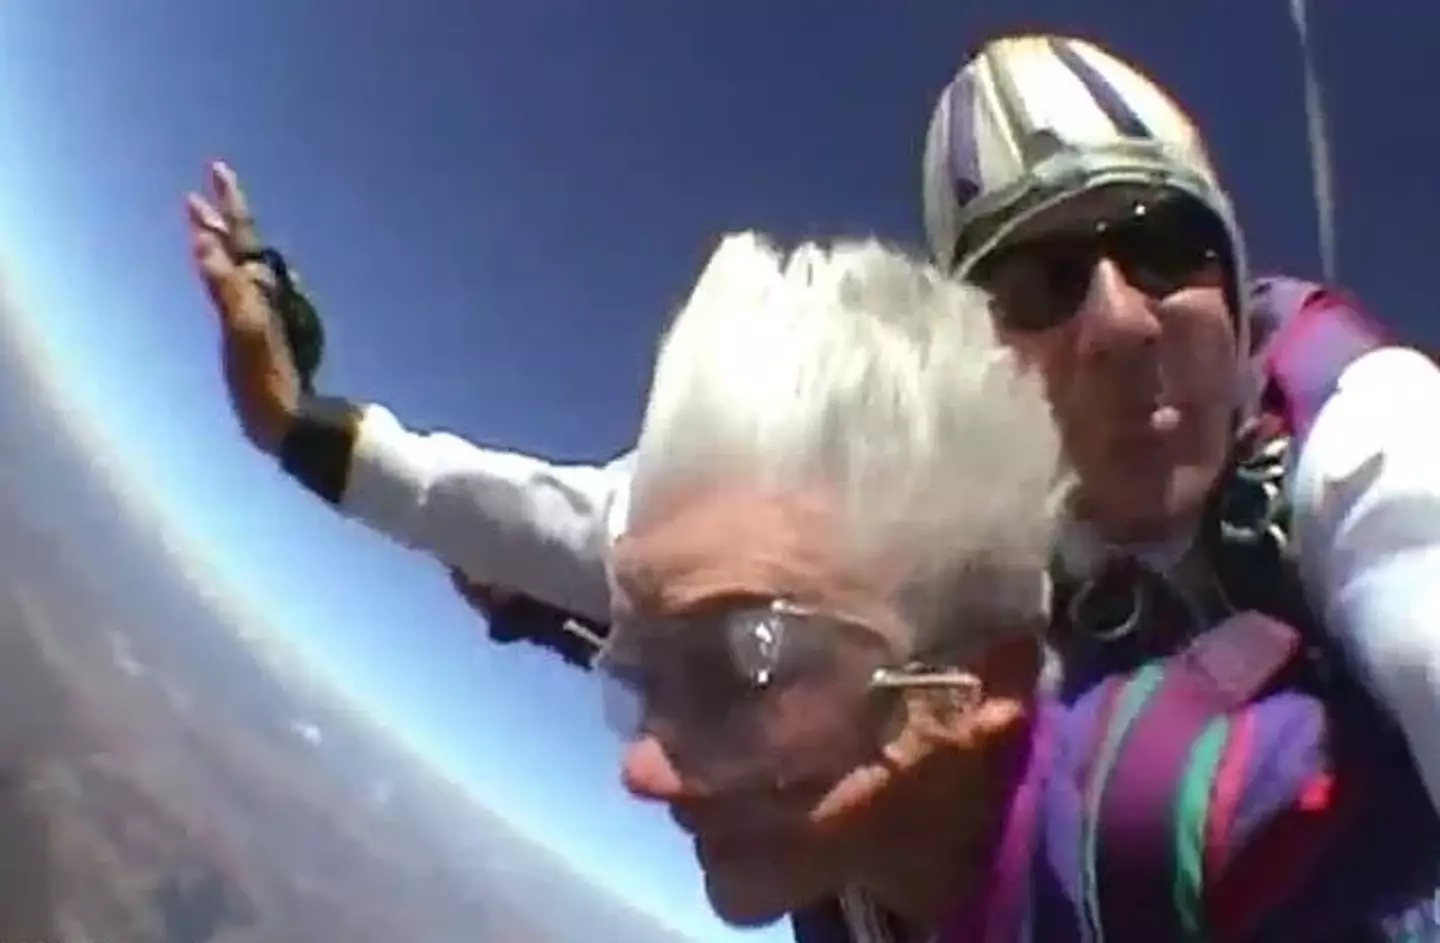 Clare Nowland was known for her zest for life, and even went skydiving on her 80th birthday.